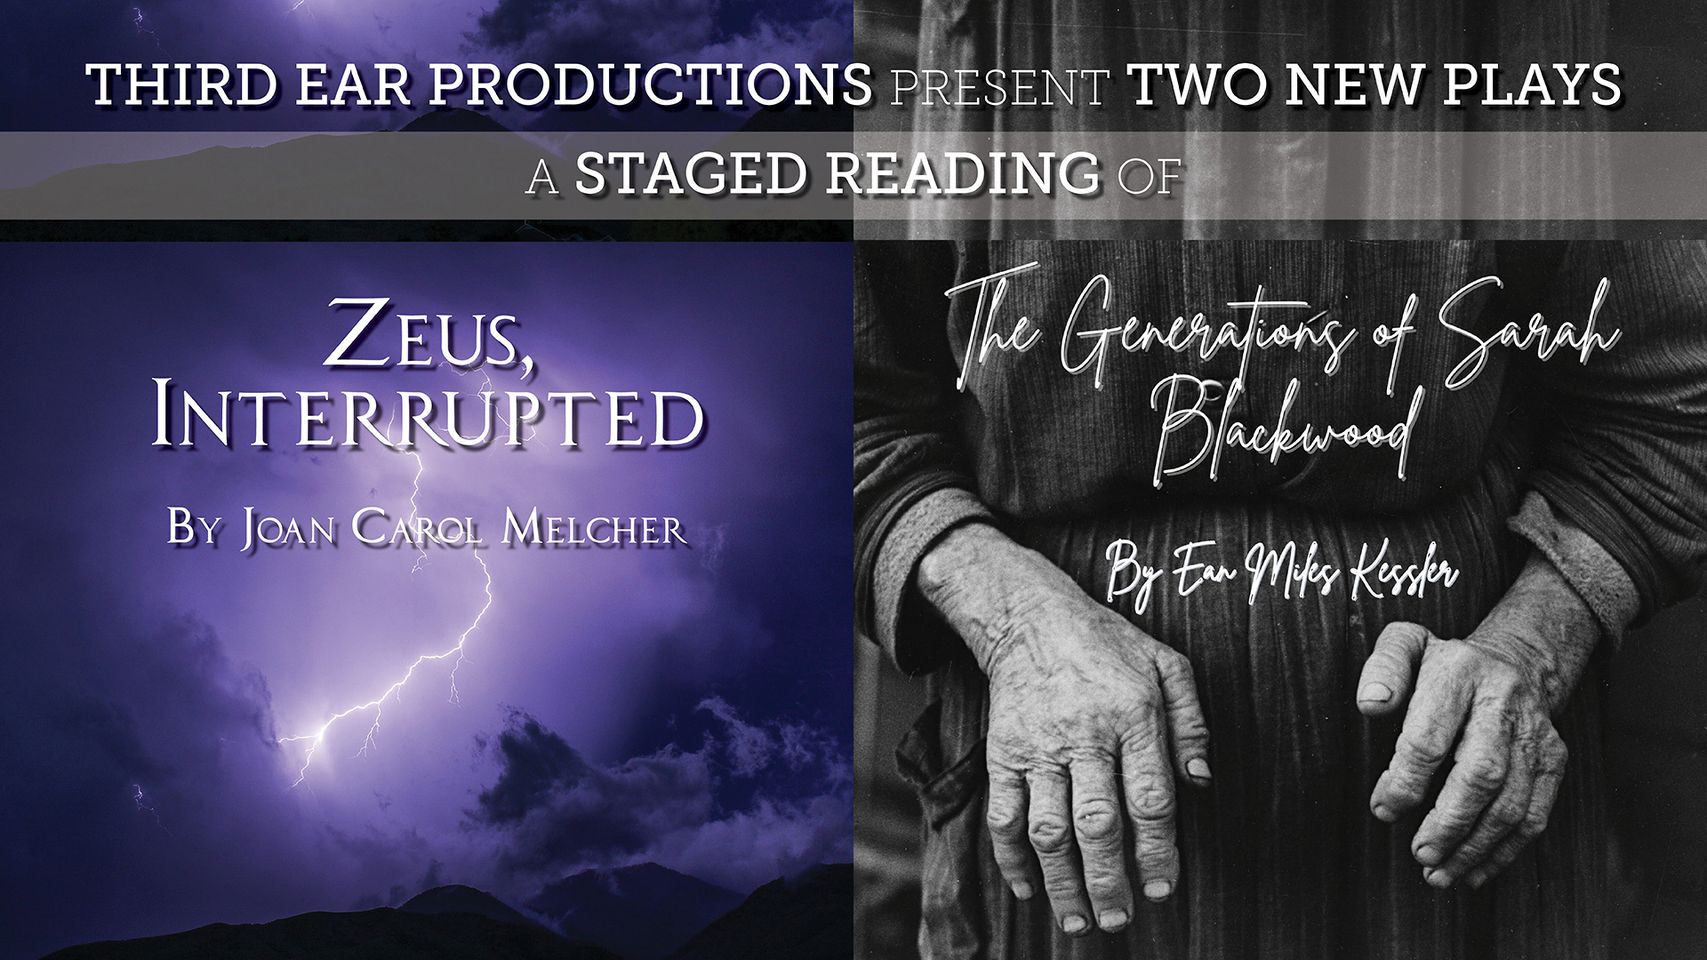 Two New Plays, A Staged Reading of 'Zeus Interrupted' & 'The Generations of Sarah Blackwood'